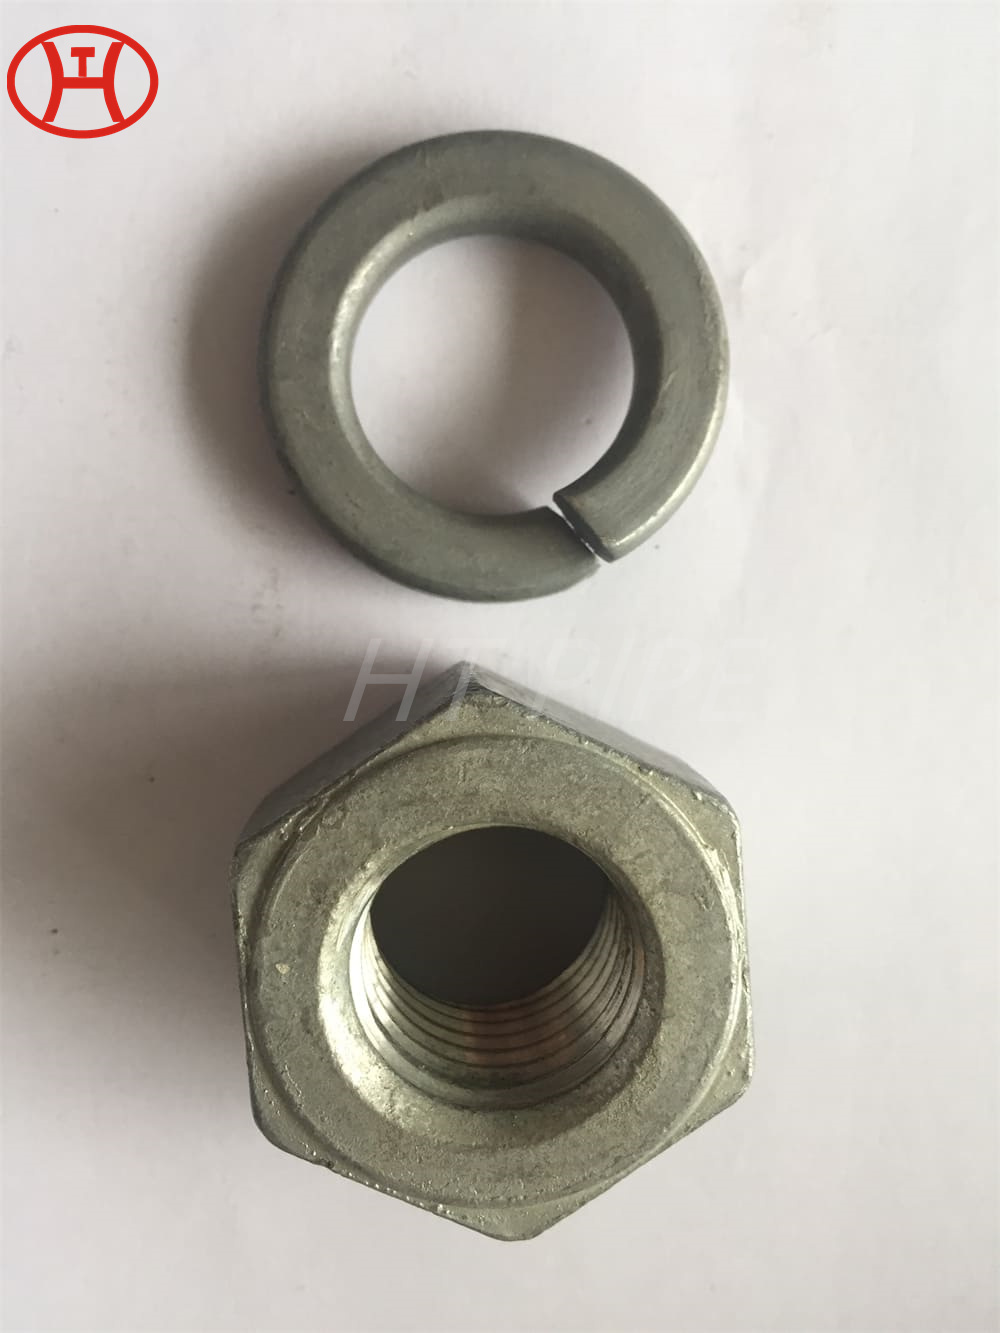 DIN934 UNS N08800-Incoloy 800 Nature Nickel Alloy 3-8 hex nnt Incoloy 800 hex nut 1-4 grade 2